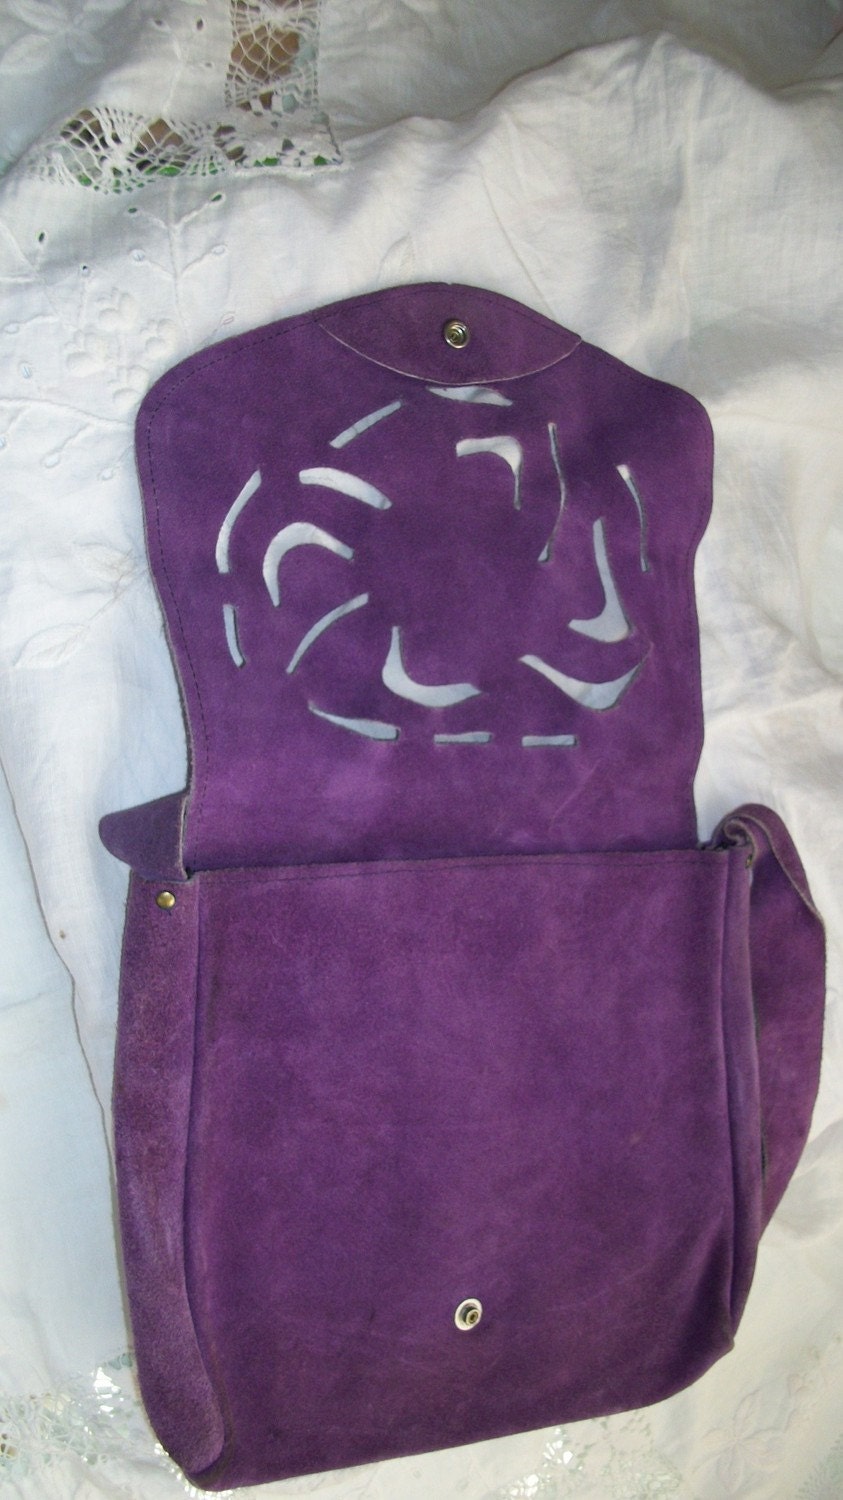 Vintage 1970s Purple Suede Purse with a Lacey Cutout Front Flap Super Cute Hippy Style Reserved for LoveStreetVintage